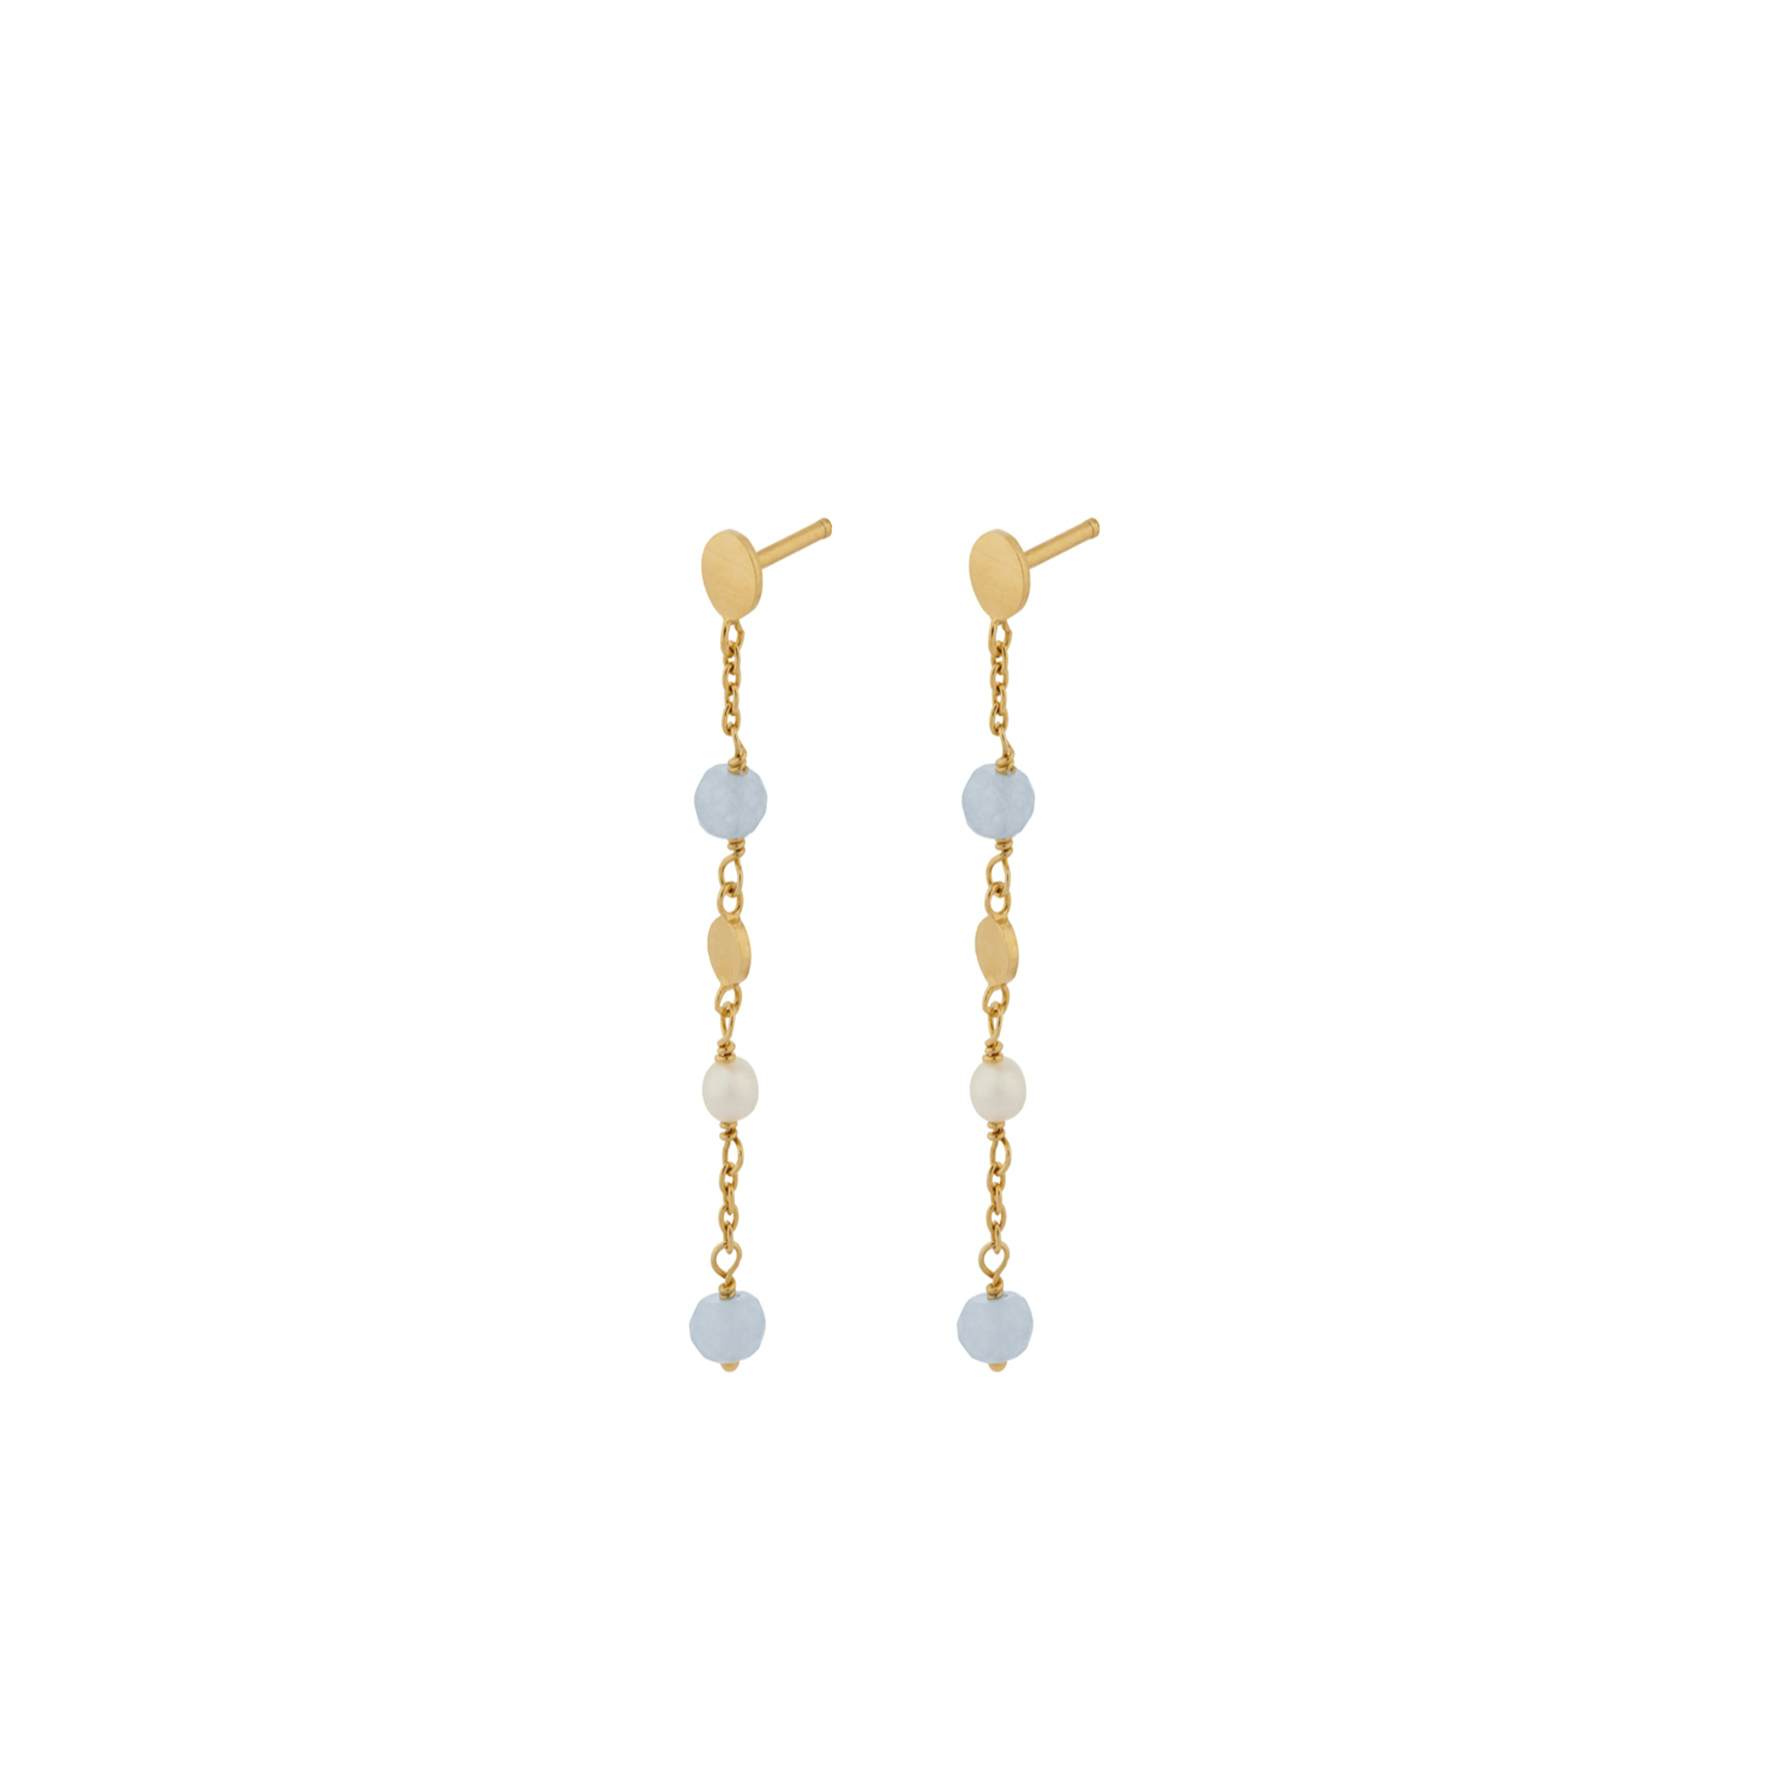 Afterglow Sea Earchains from Pernille Corydon in Goldplated-Silver Sterling 925